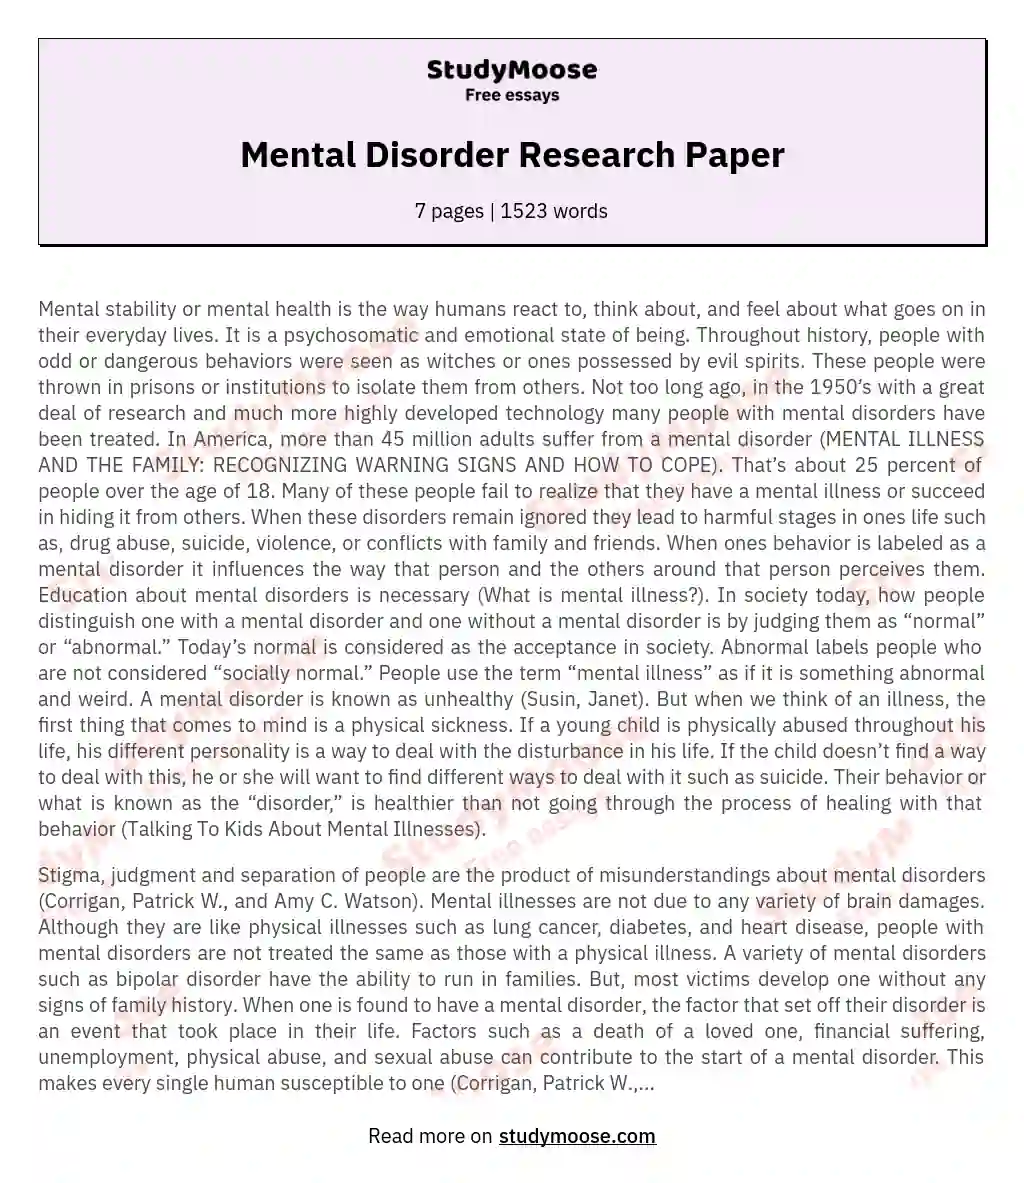 research papers on mental disorders